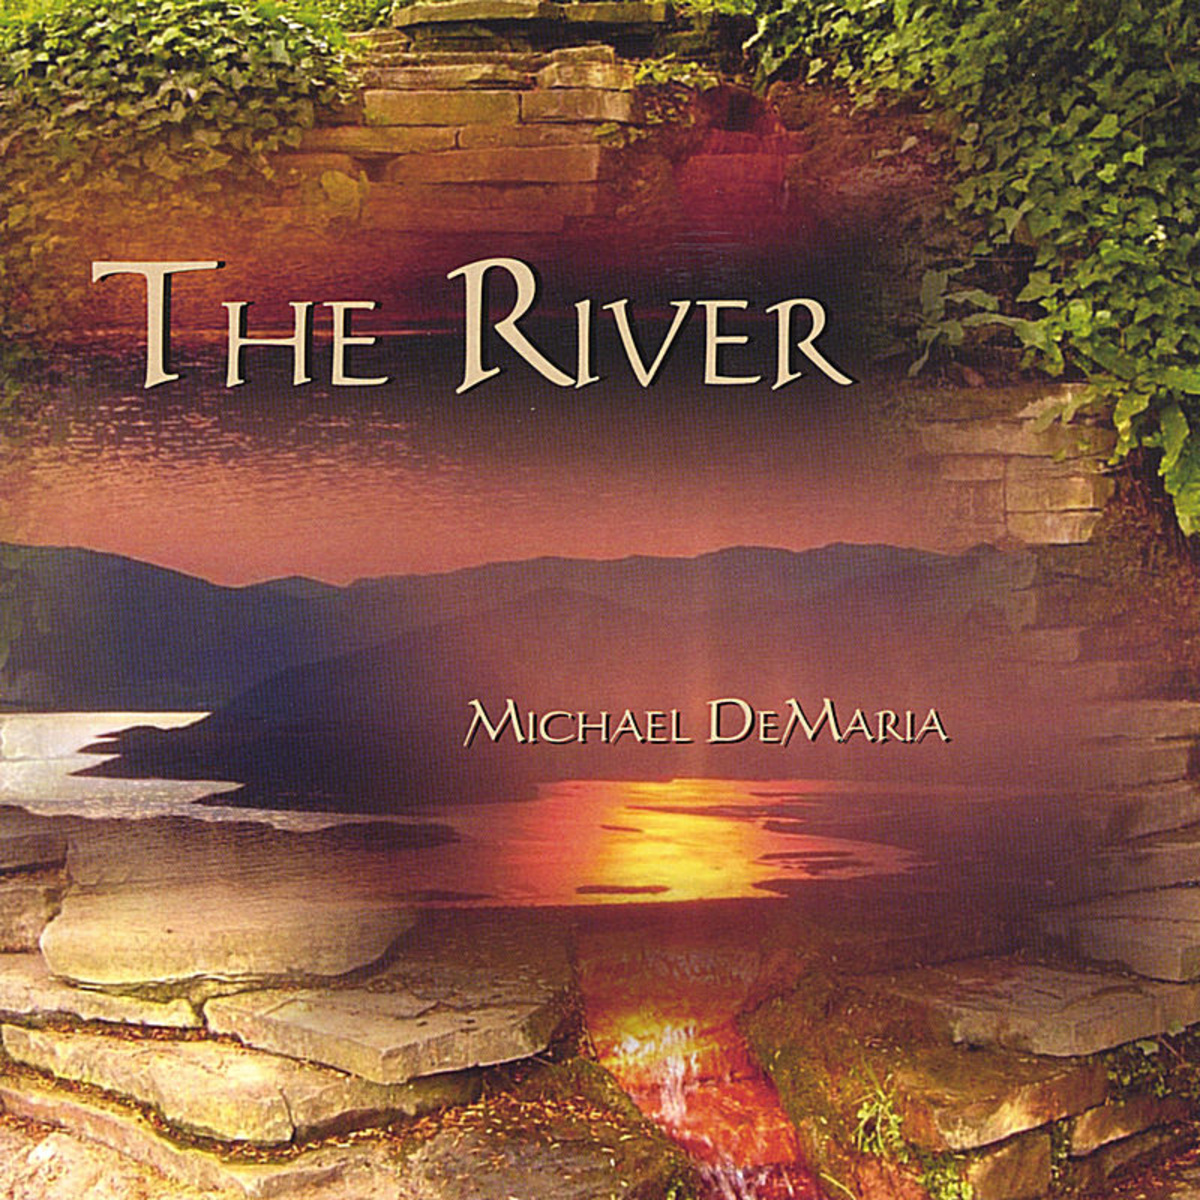 Cd Michael Brant DeMaria - the river Cover